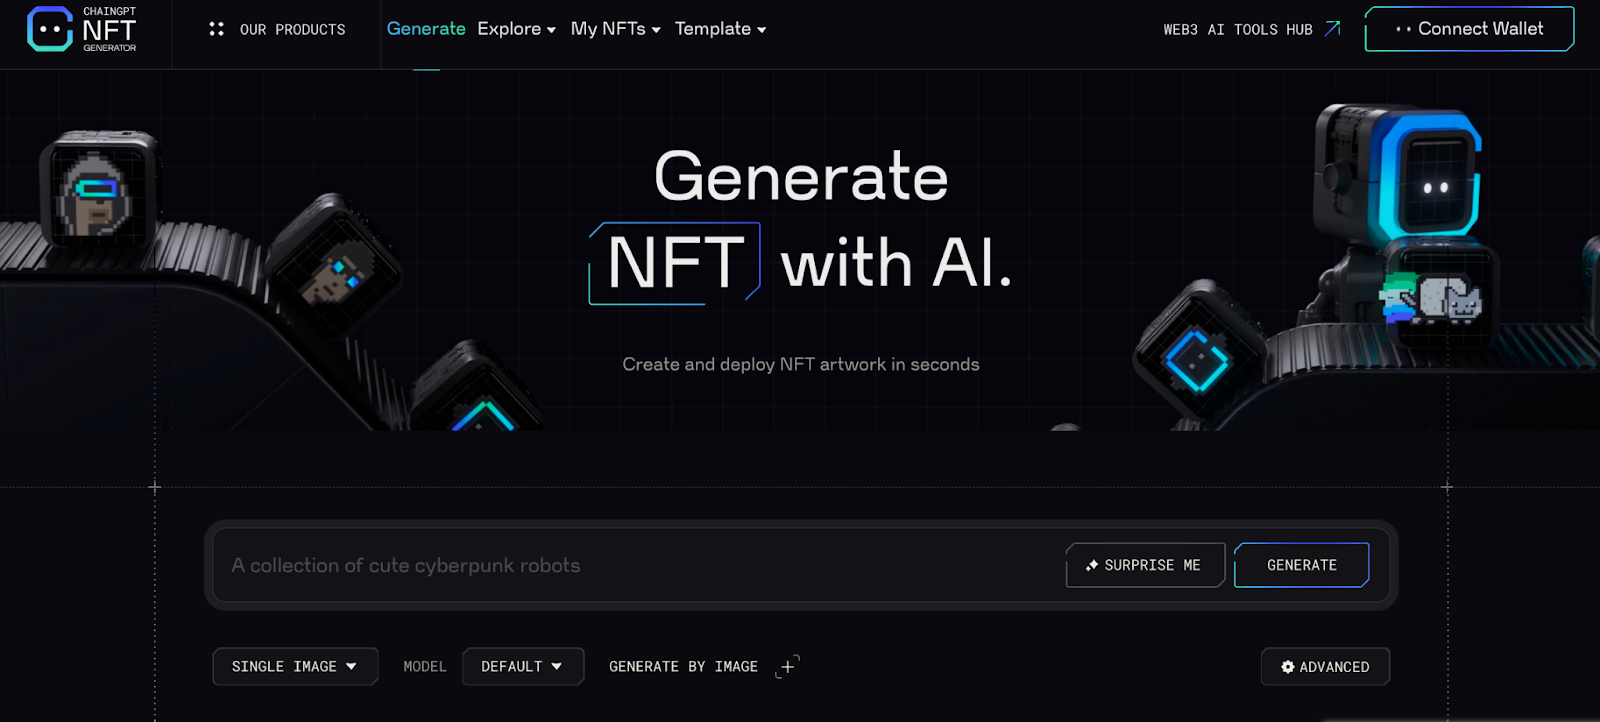 Screenshot of ChainGPT's AI NFT Generator at NFT.Chaingpt.org. 
ChainGPT's AI NFT Generator logo. Keywords: AI NFT, Web3, crypto, blockchain, NFT creation, artificial intelligence, digital art, decentralized technology, smart contracts, ChainGPT platform, cryptocurrency, non-fungible tokens, crypto art, NFT marketplace, AI-powered NFT generation, decentralized finance, DeFi, NFT collectibles, Ethereum, Binance Smart Chain, digital assets, NFT minting, AI-driven art, crypto innovation, NFT economy, tokenization.